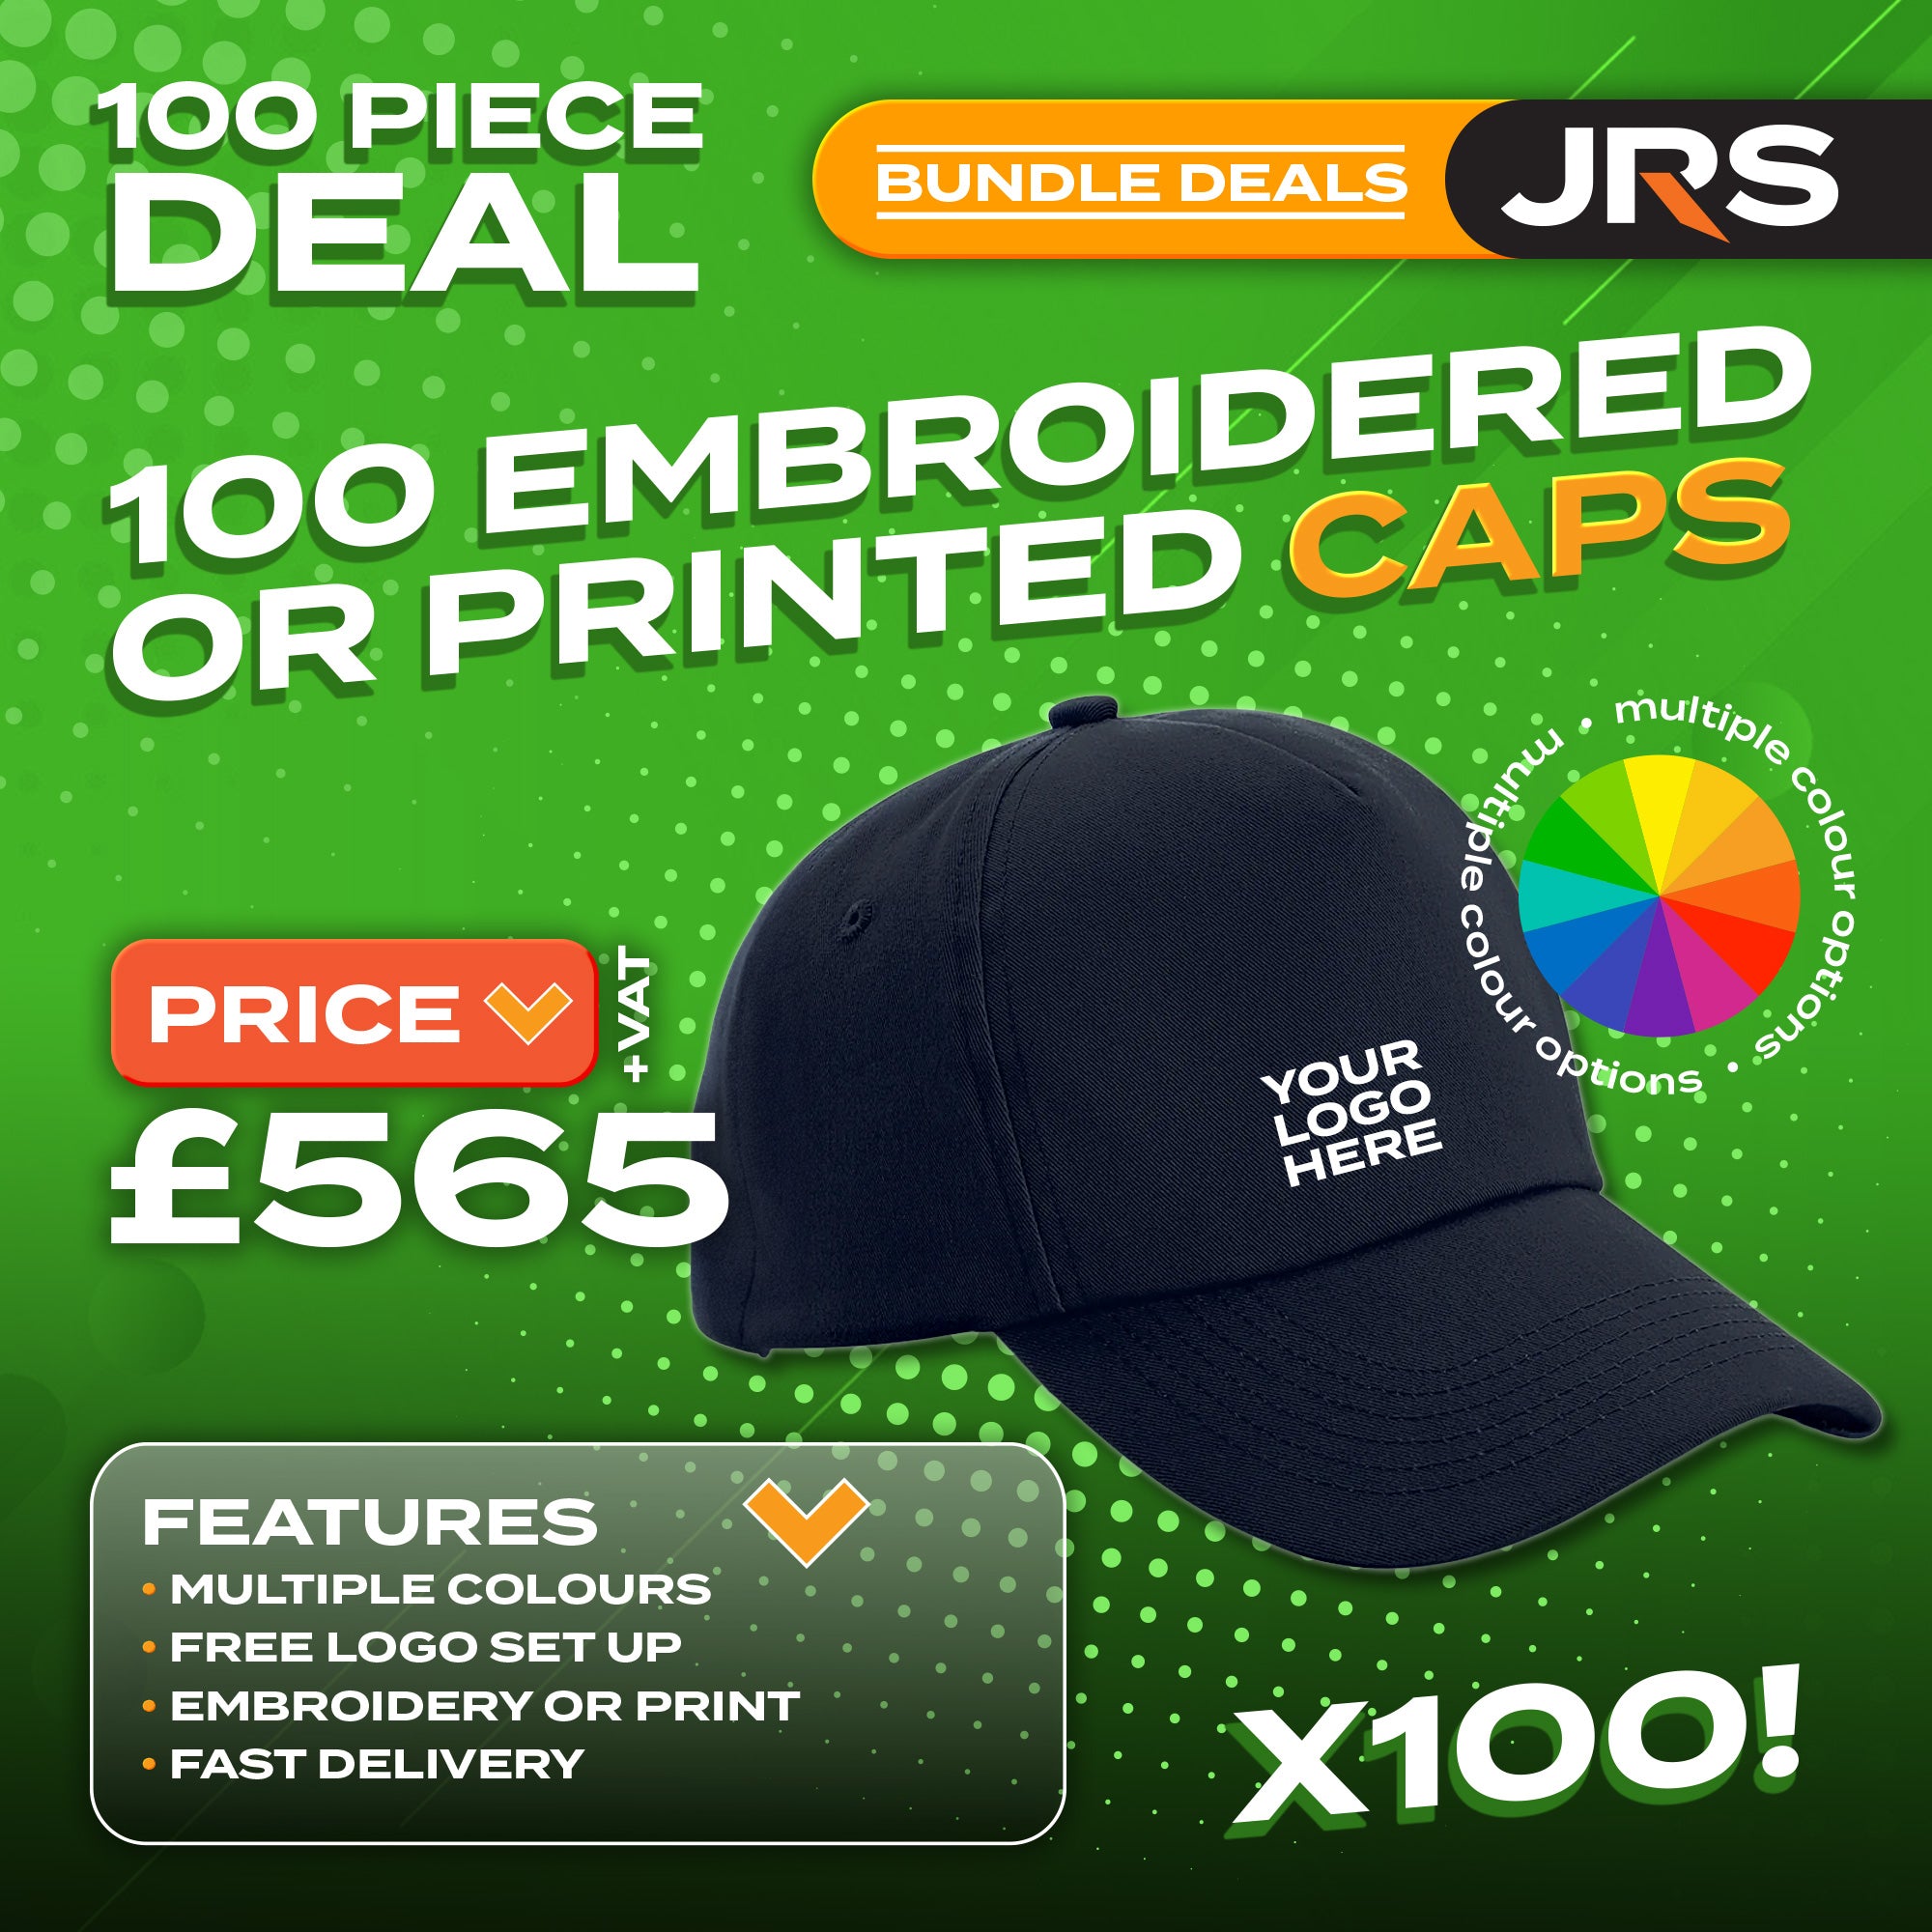 100x Embroidered/Printed Caps Bundle Deal with Free Company/Club Logo